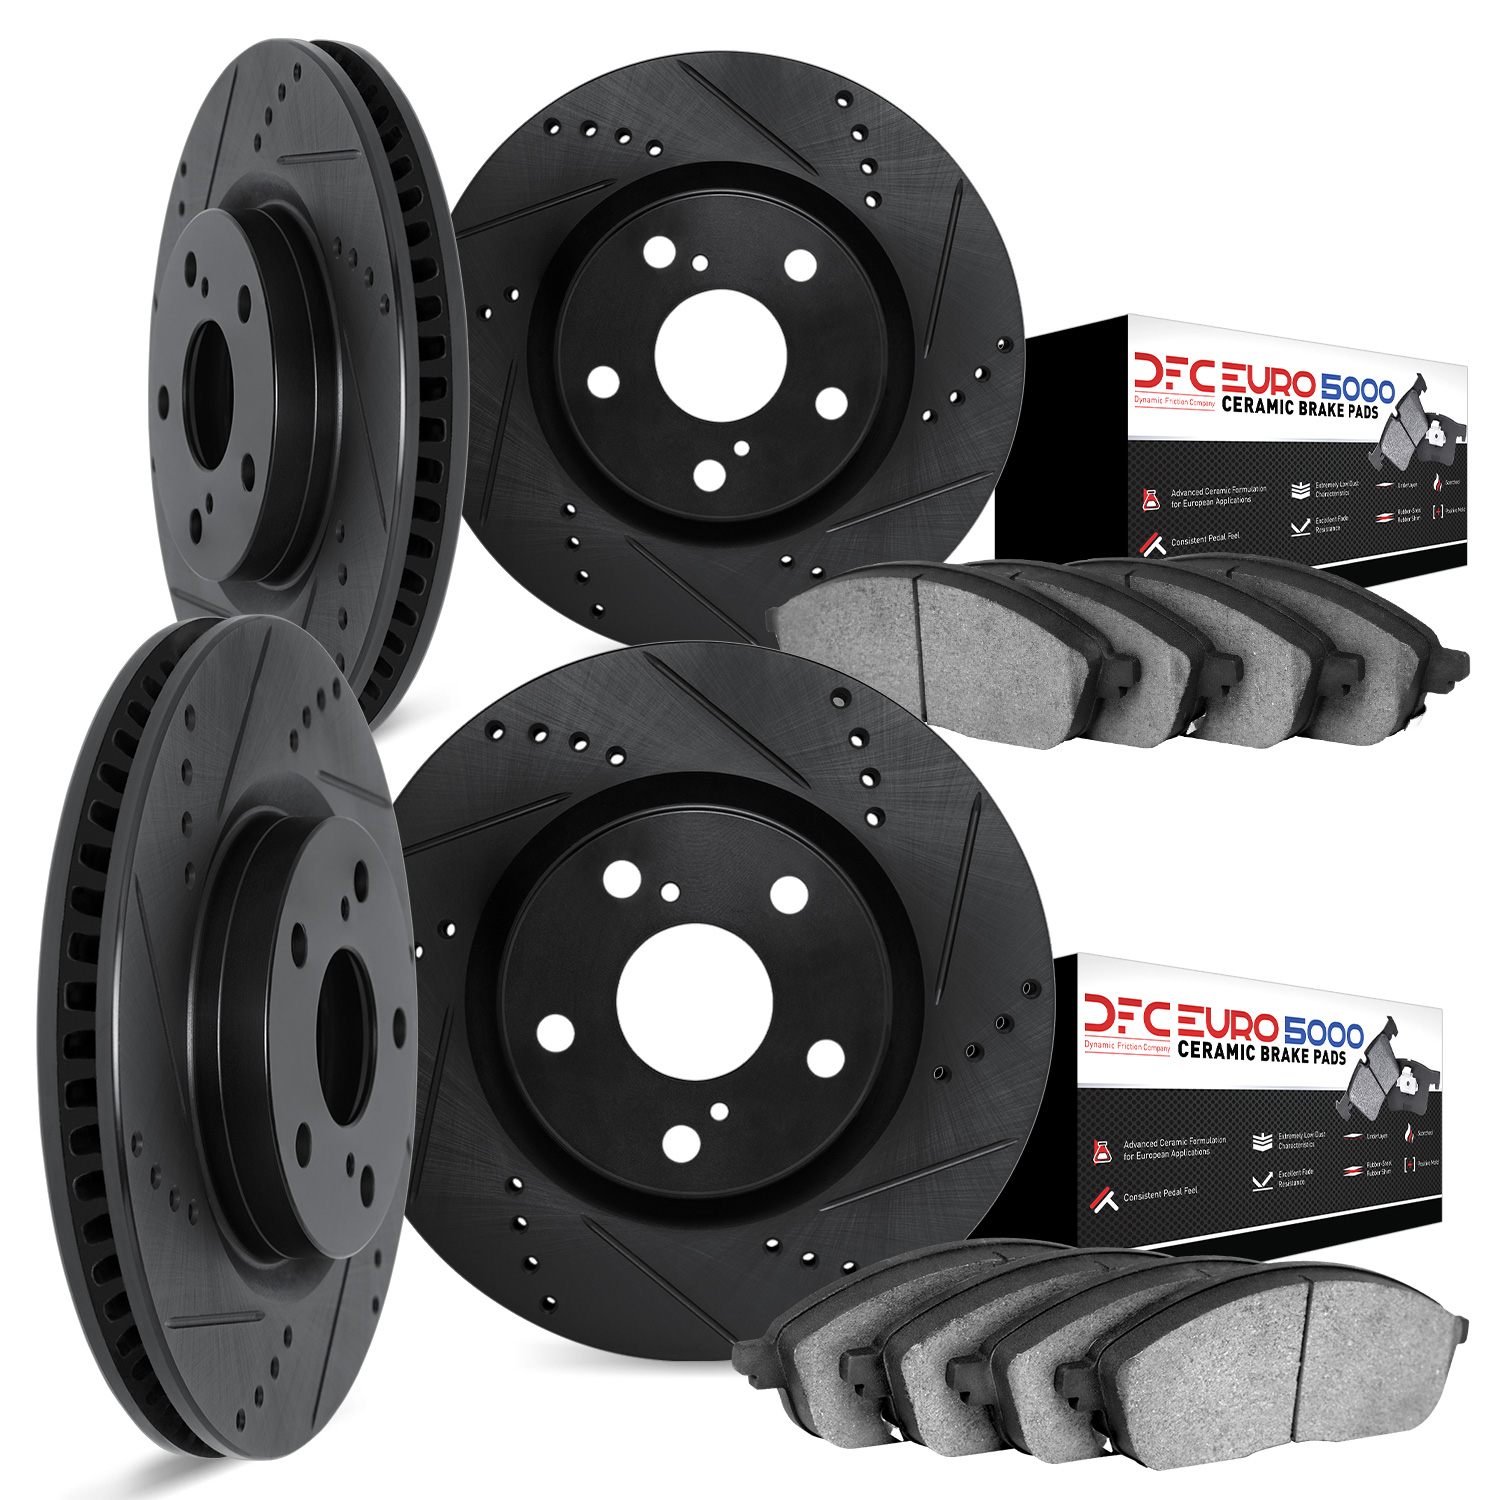 8604-31032 Drilled/Slotted Brake Rotors w/5000 Euro Ceramic Brake Pads Kit [Black], Fits Select BMW, Position: Front and Rear